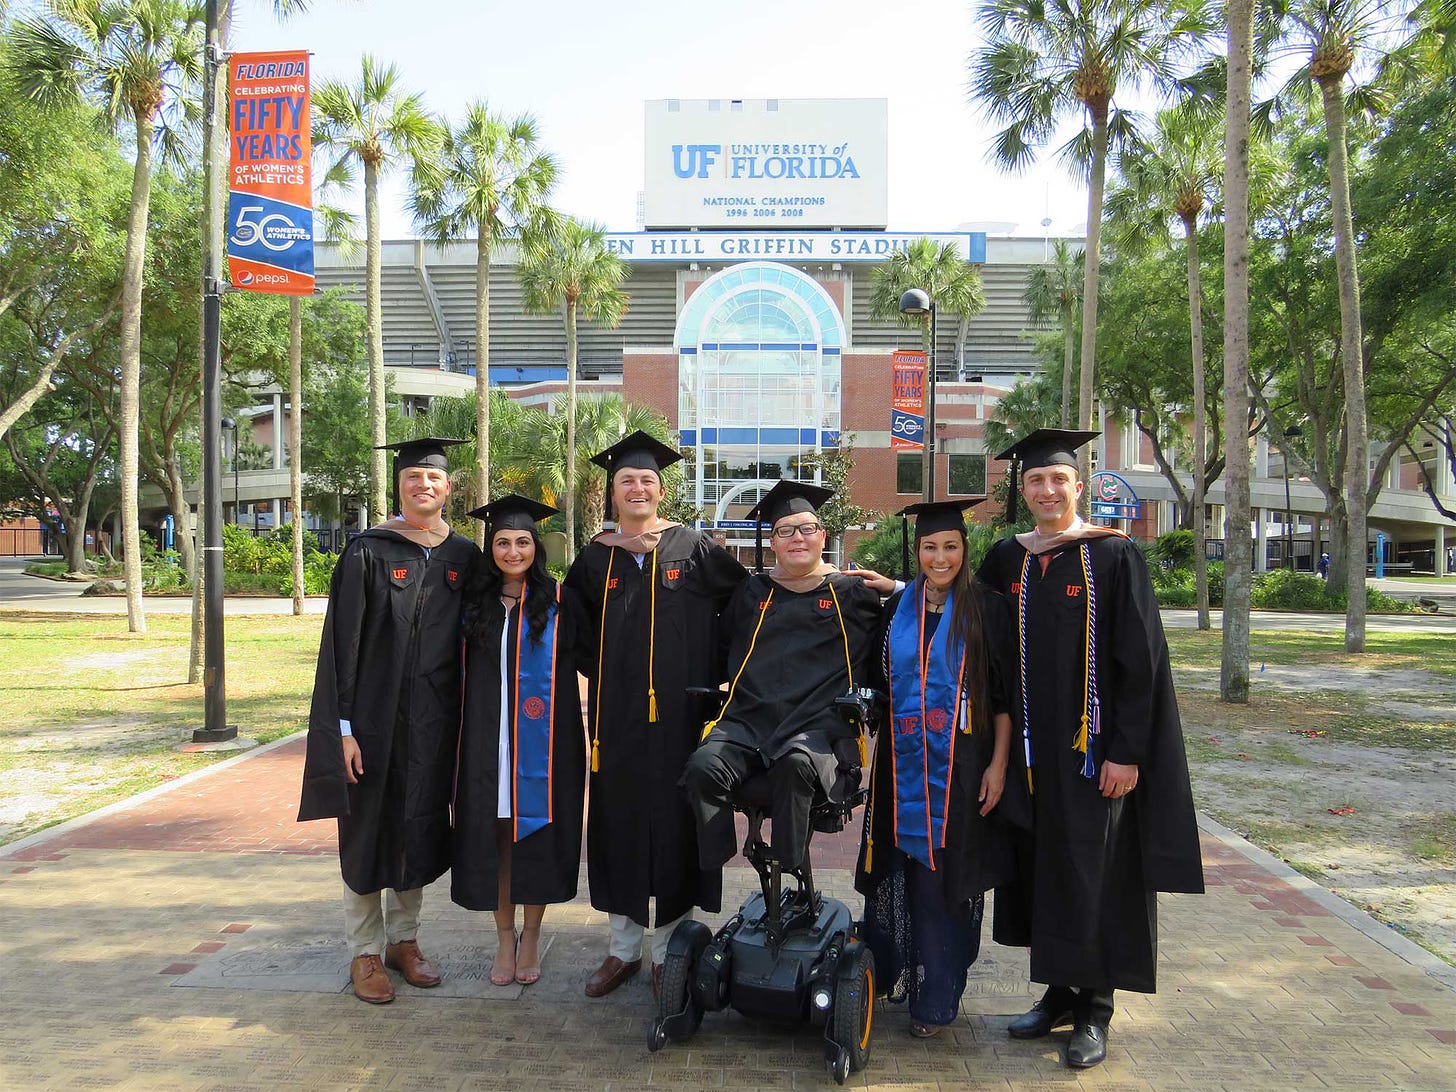 John wearing a graduation gown, pictured with fellow alumni in front of the University of Florida football stadium.